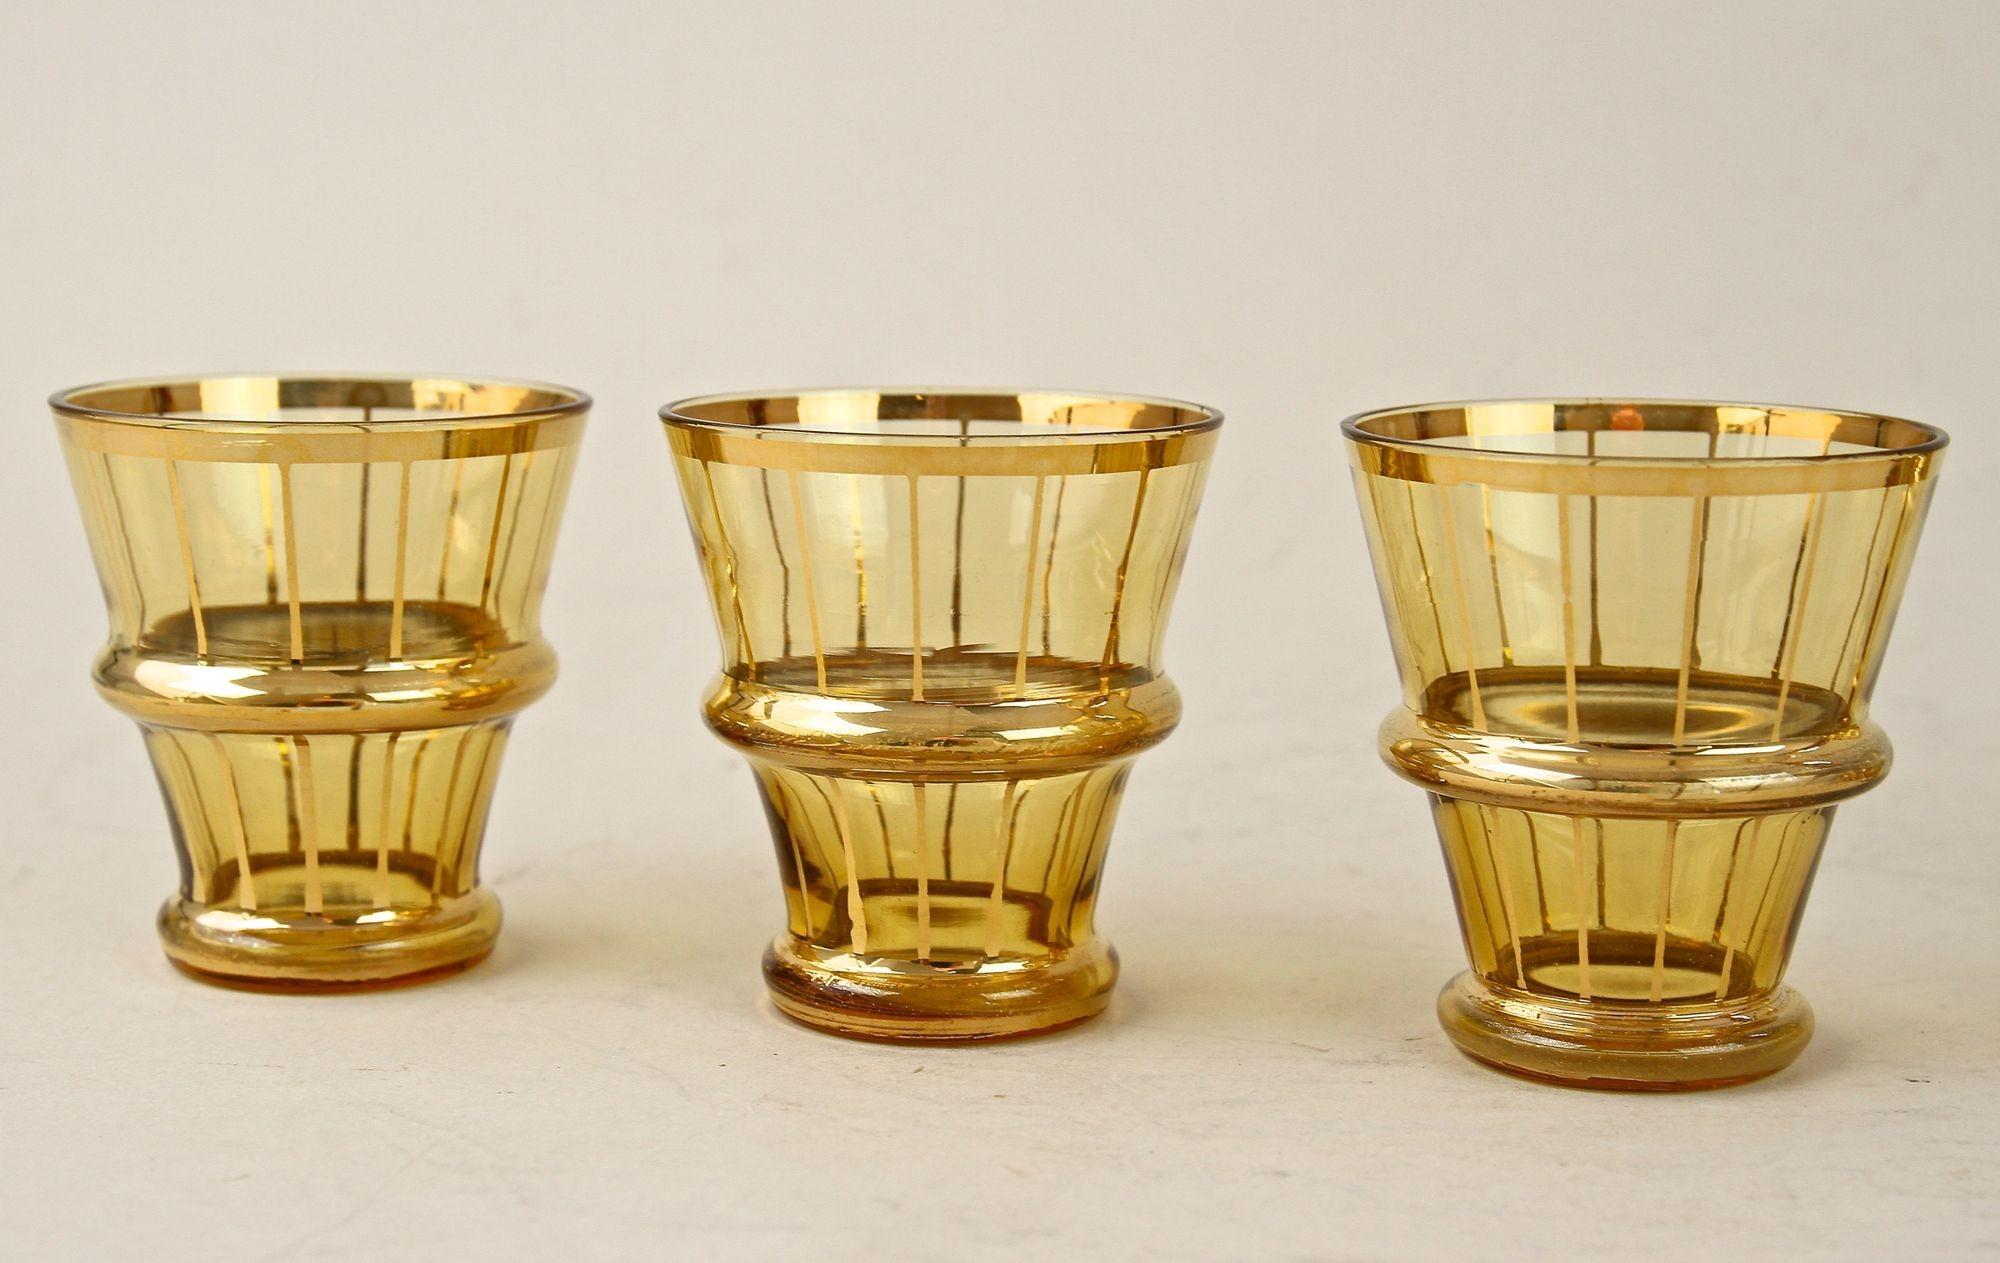 Amber Colored Gilt Art Deco Glass Decanter Set with 6 Shot Glasses, CZ ca. 1920 For Sale 8